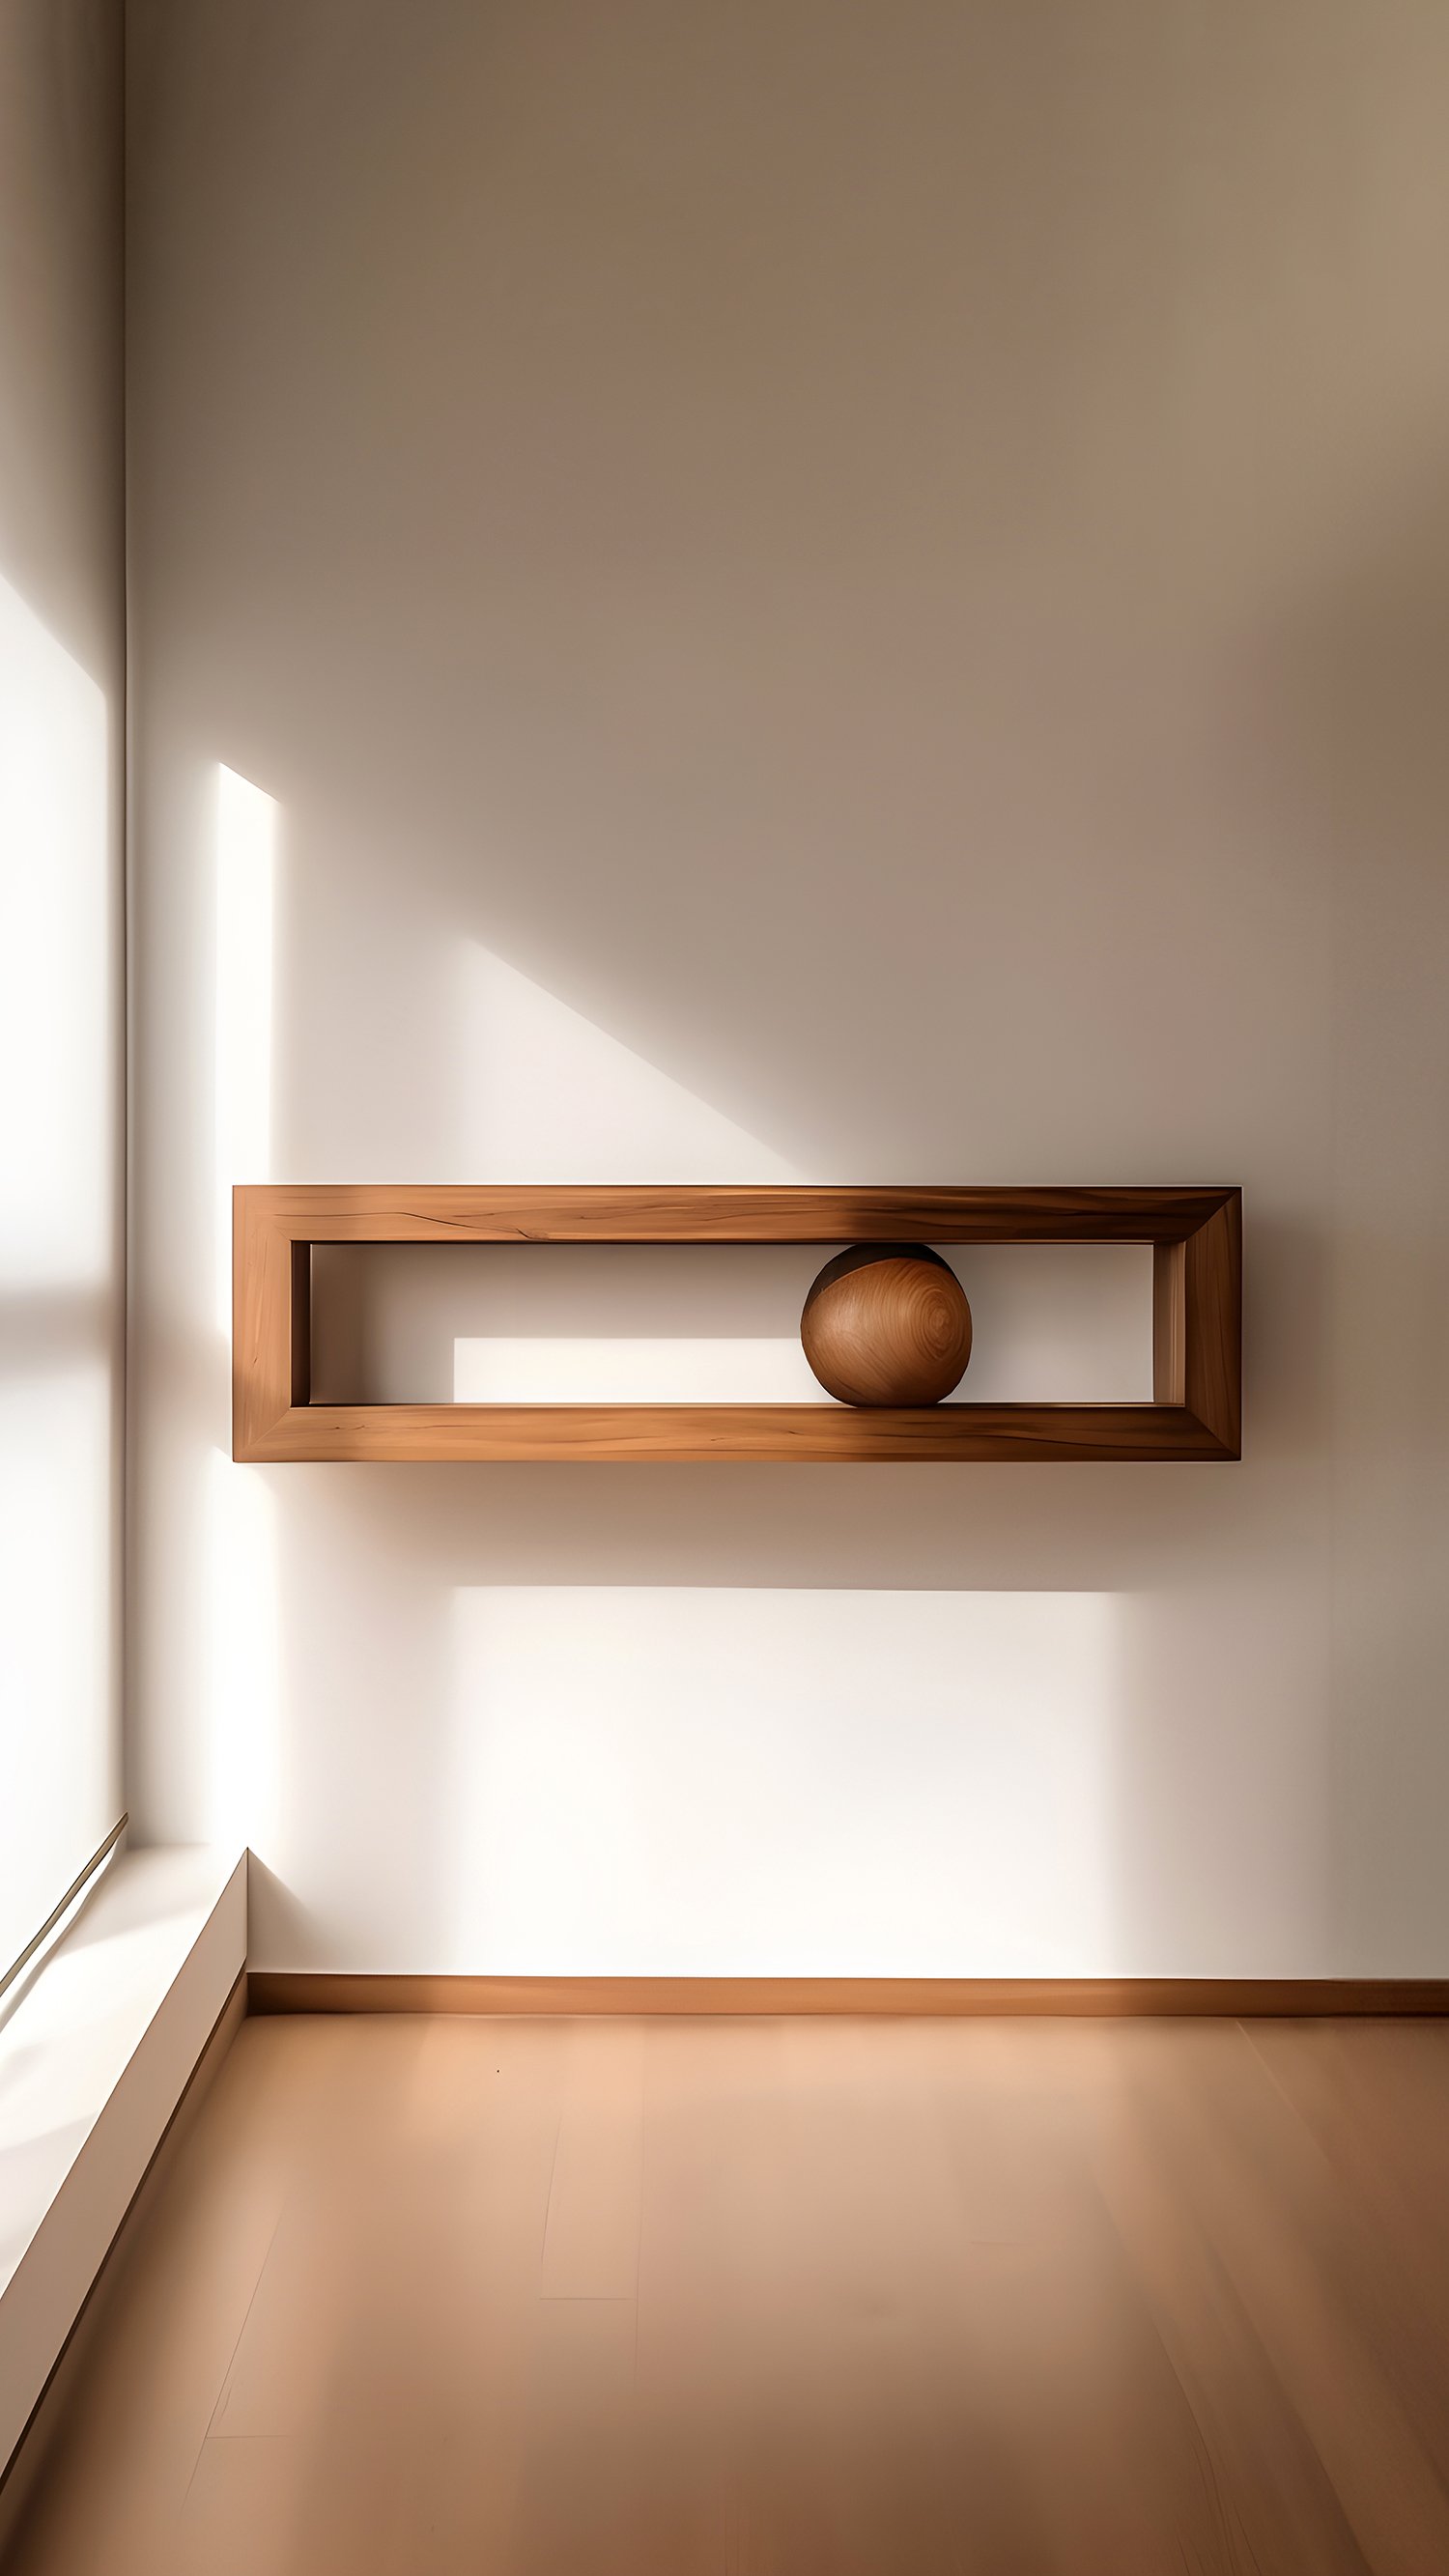 Rectangular Floating Shelf with One Sculptural Wooden Pebble Accent, Sereno by Joel Escalona — 4.jpg